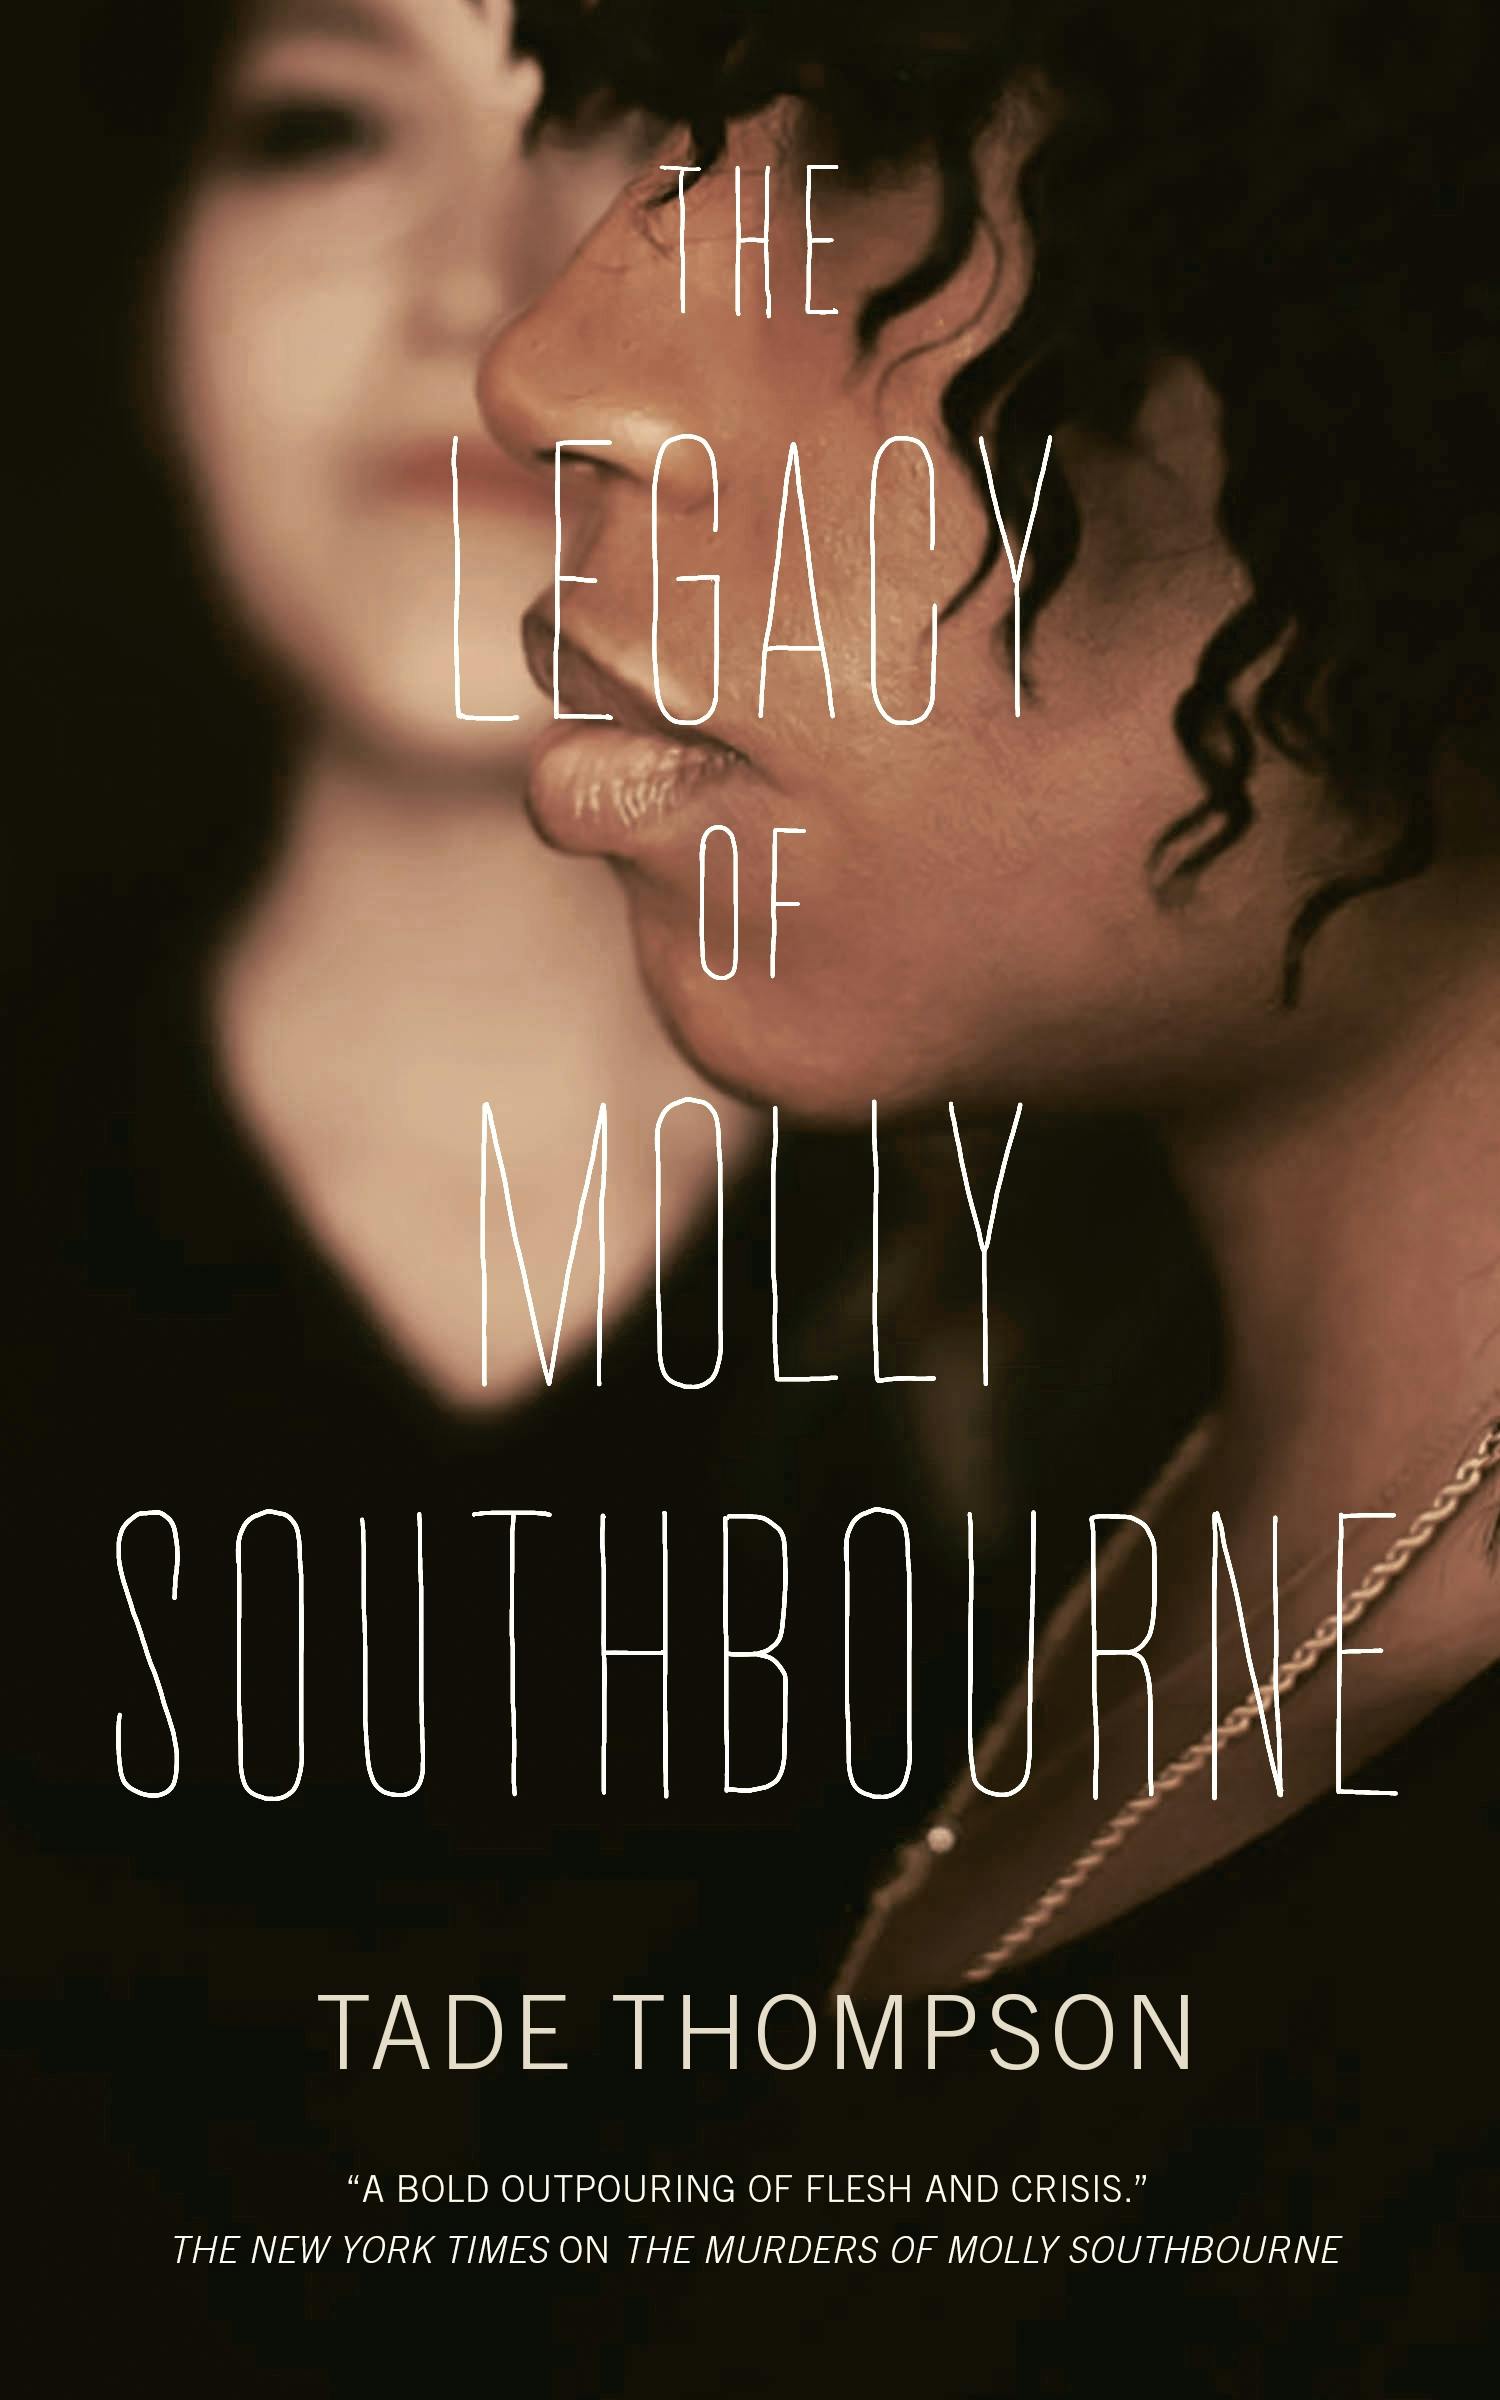 Tade Thompson: The Legacy of Molly Southbourne (EBook, 2022, Tor.com)